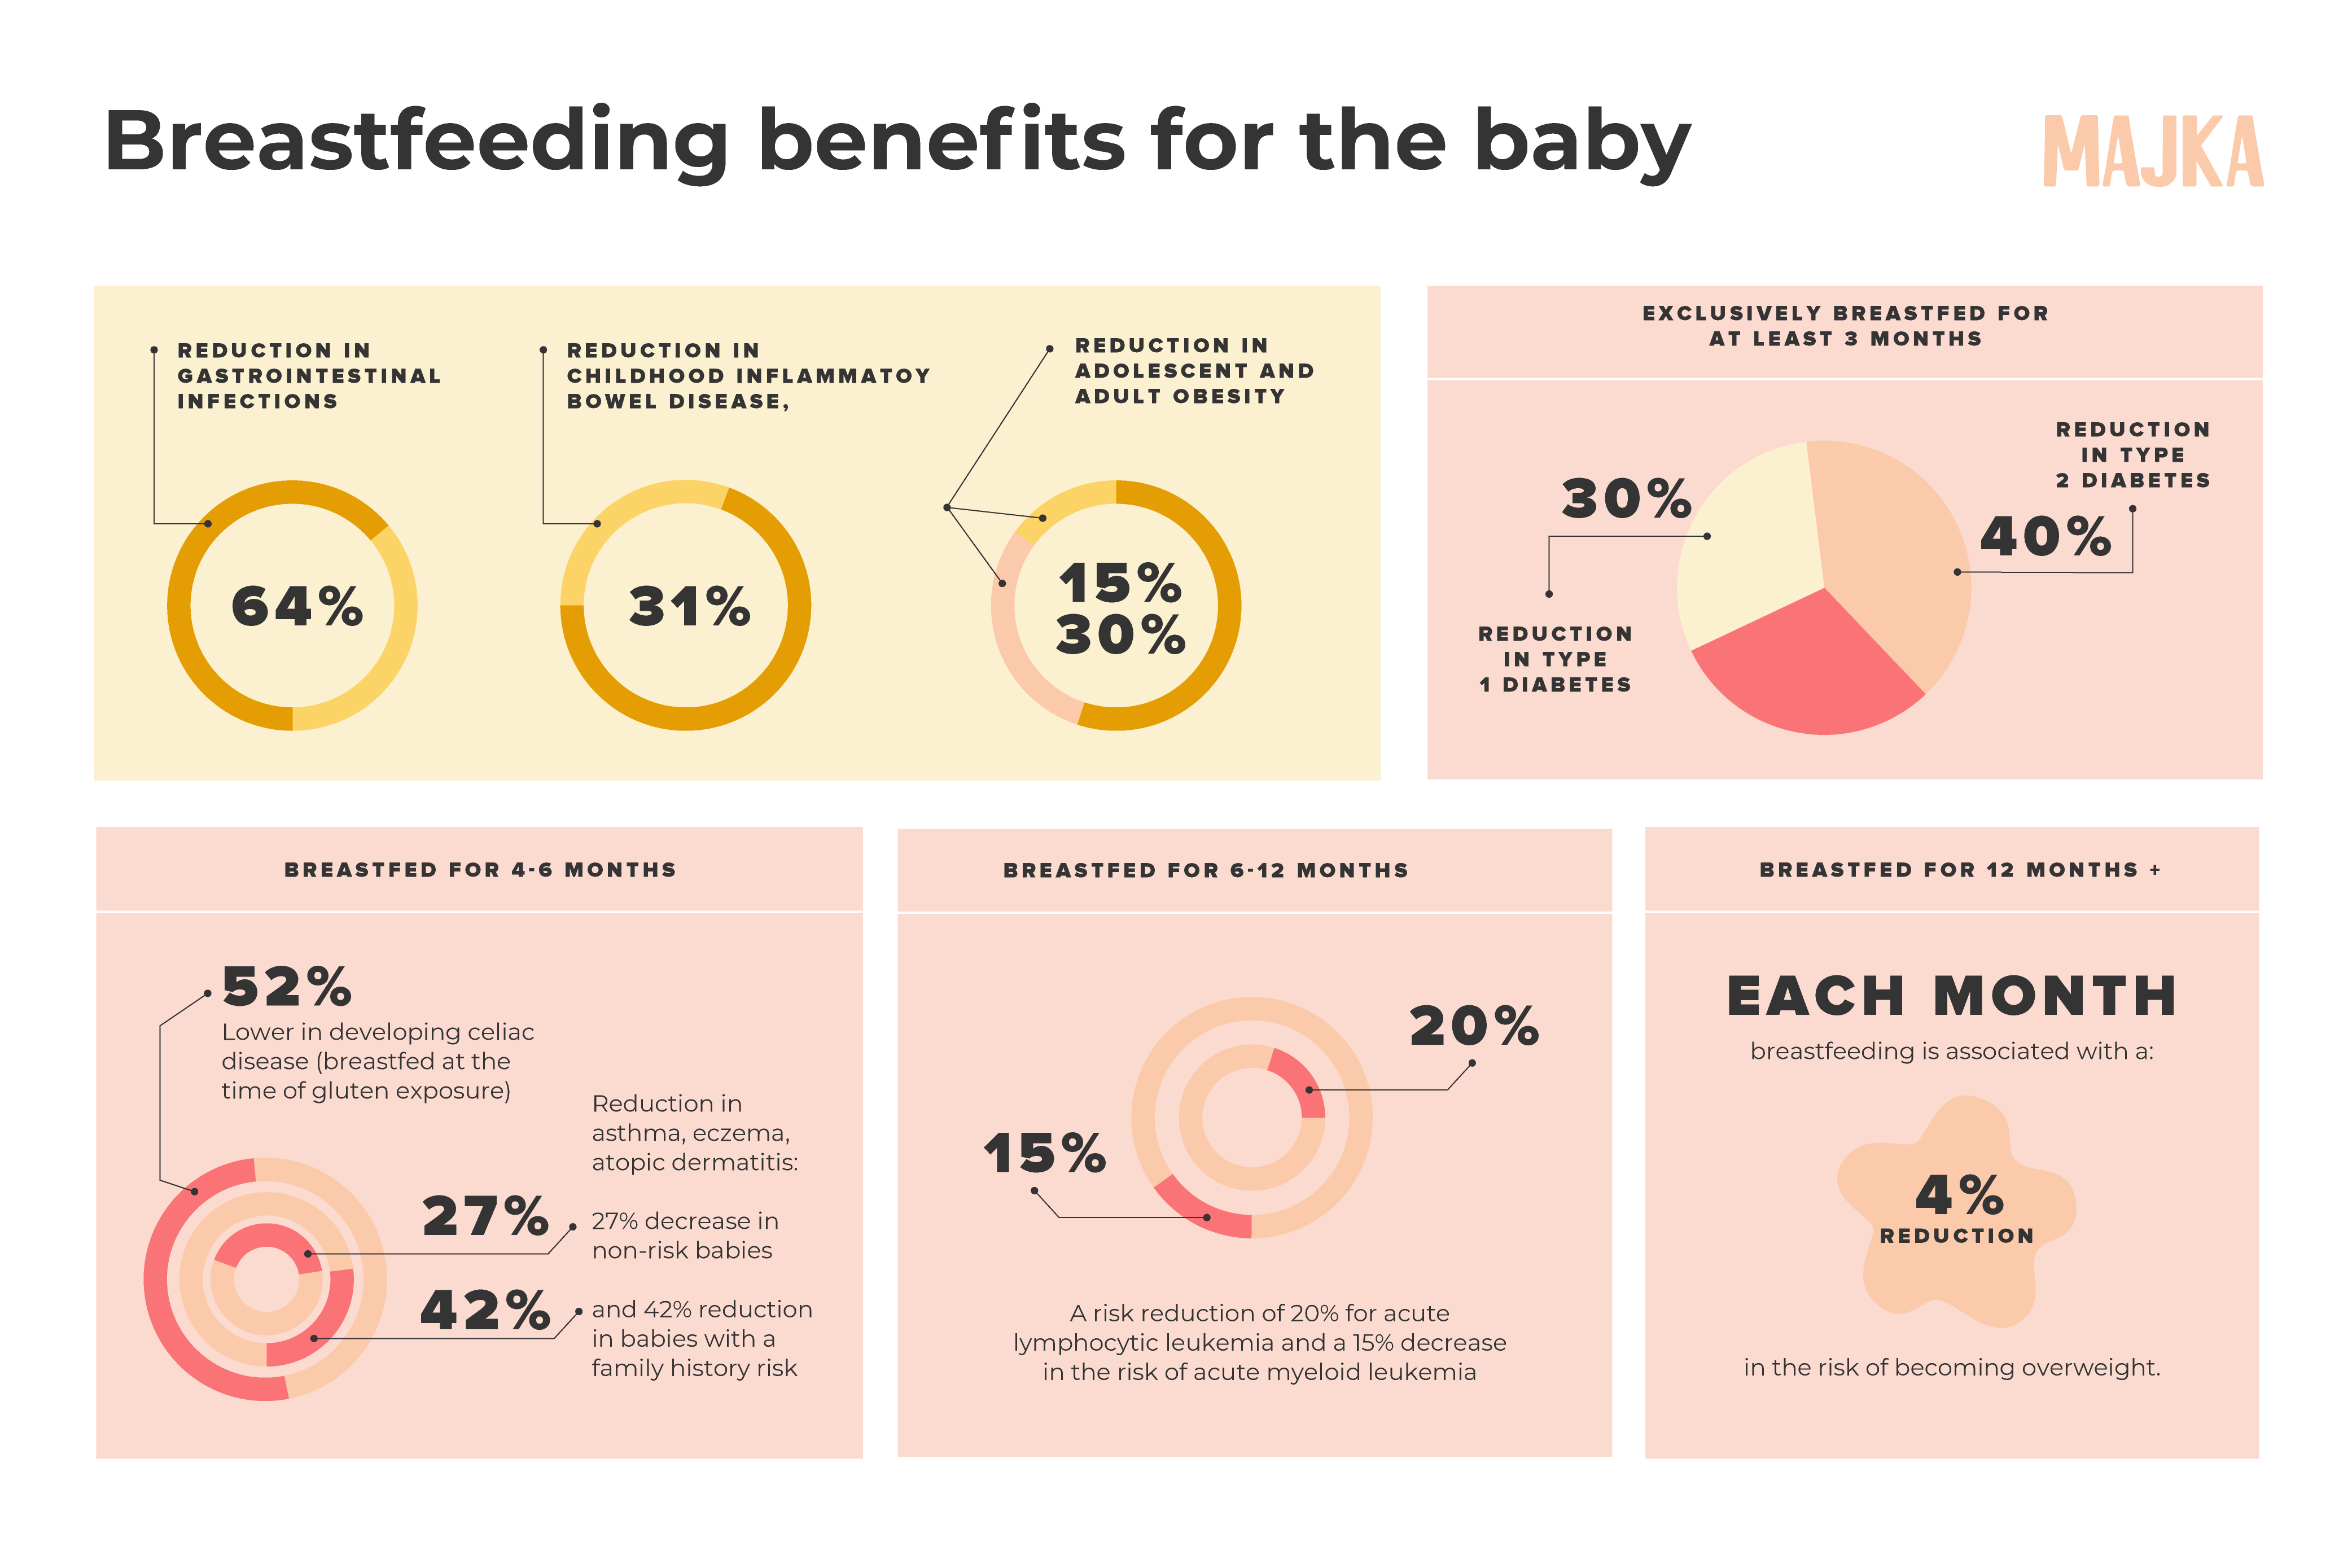 Breastfeeding Benefits for the Baby